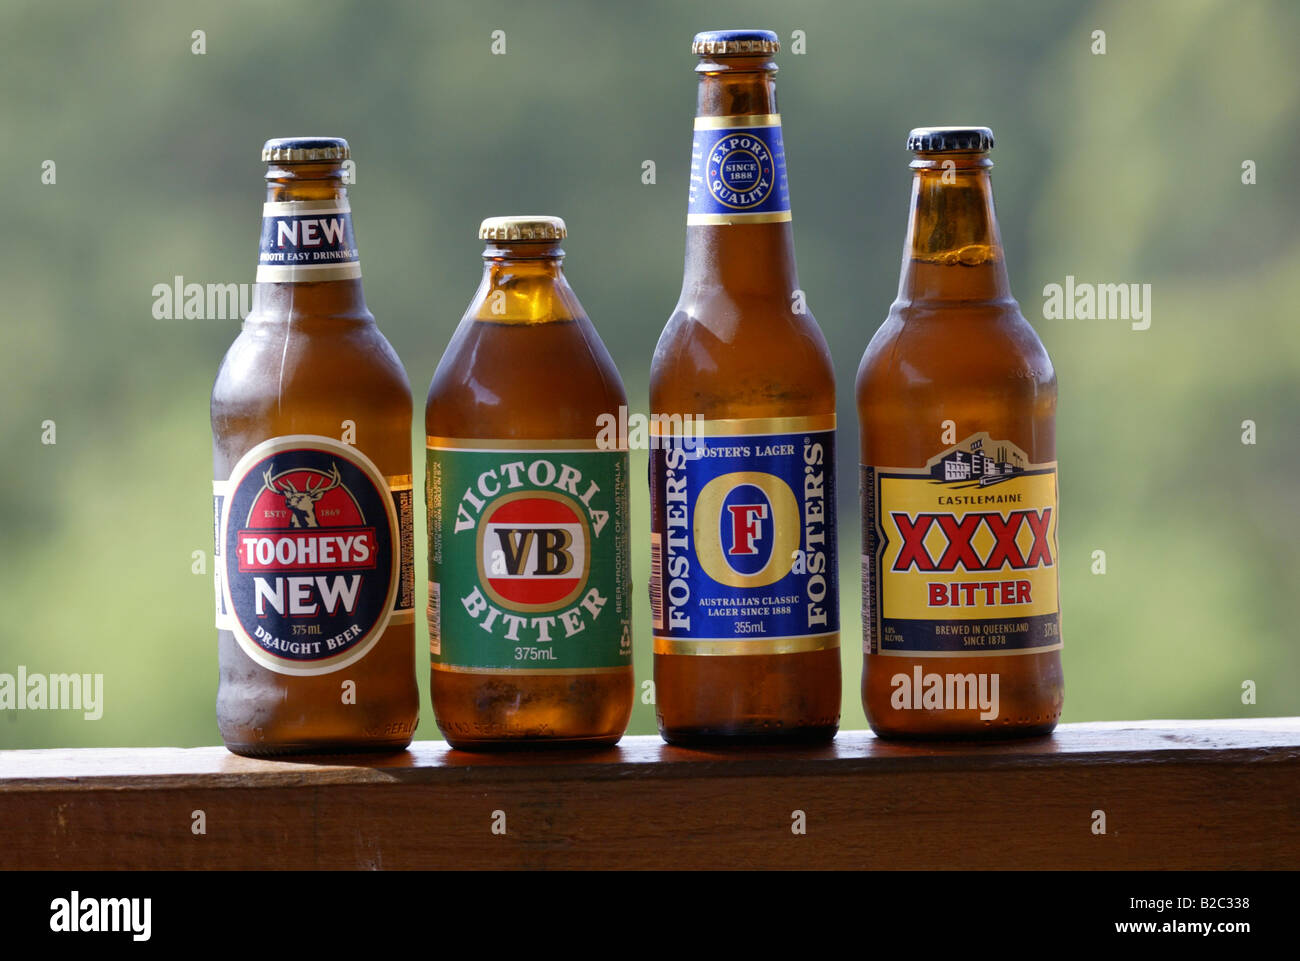 Beer bottles of Australian beers, Tooheys New, Victoria Bitter or VB,  Foster's, and XXXX Stock Photo - Alamy